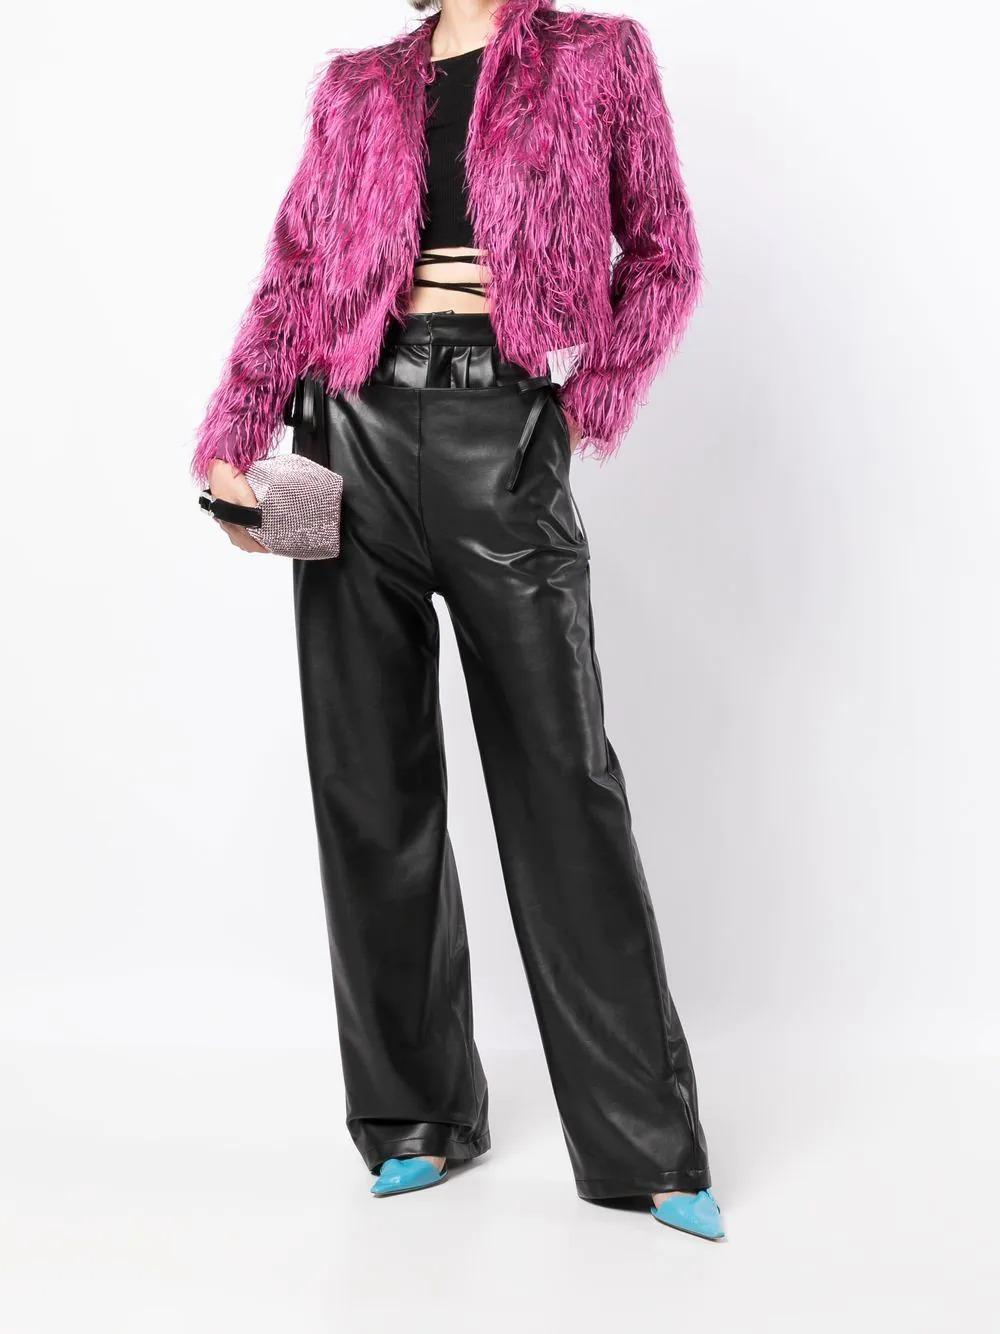 The perfect layering piece, add a touch of dramatic flair to your outfit with this vintage pre-owned shaggy faux fur jacket from Saint Laurent. Designed with a cropped fit, pair with jeans and sneakers to dress up a casual look or throw over an